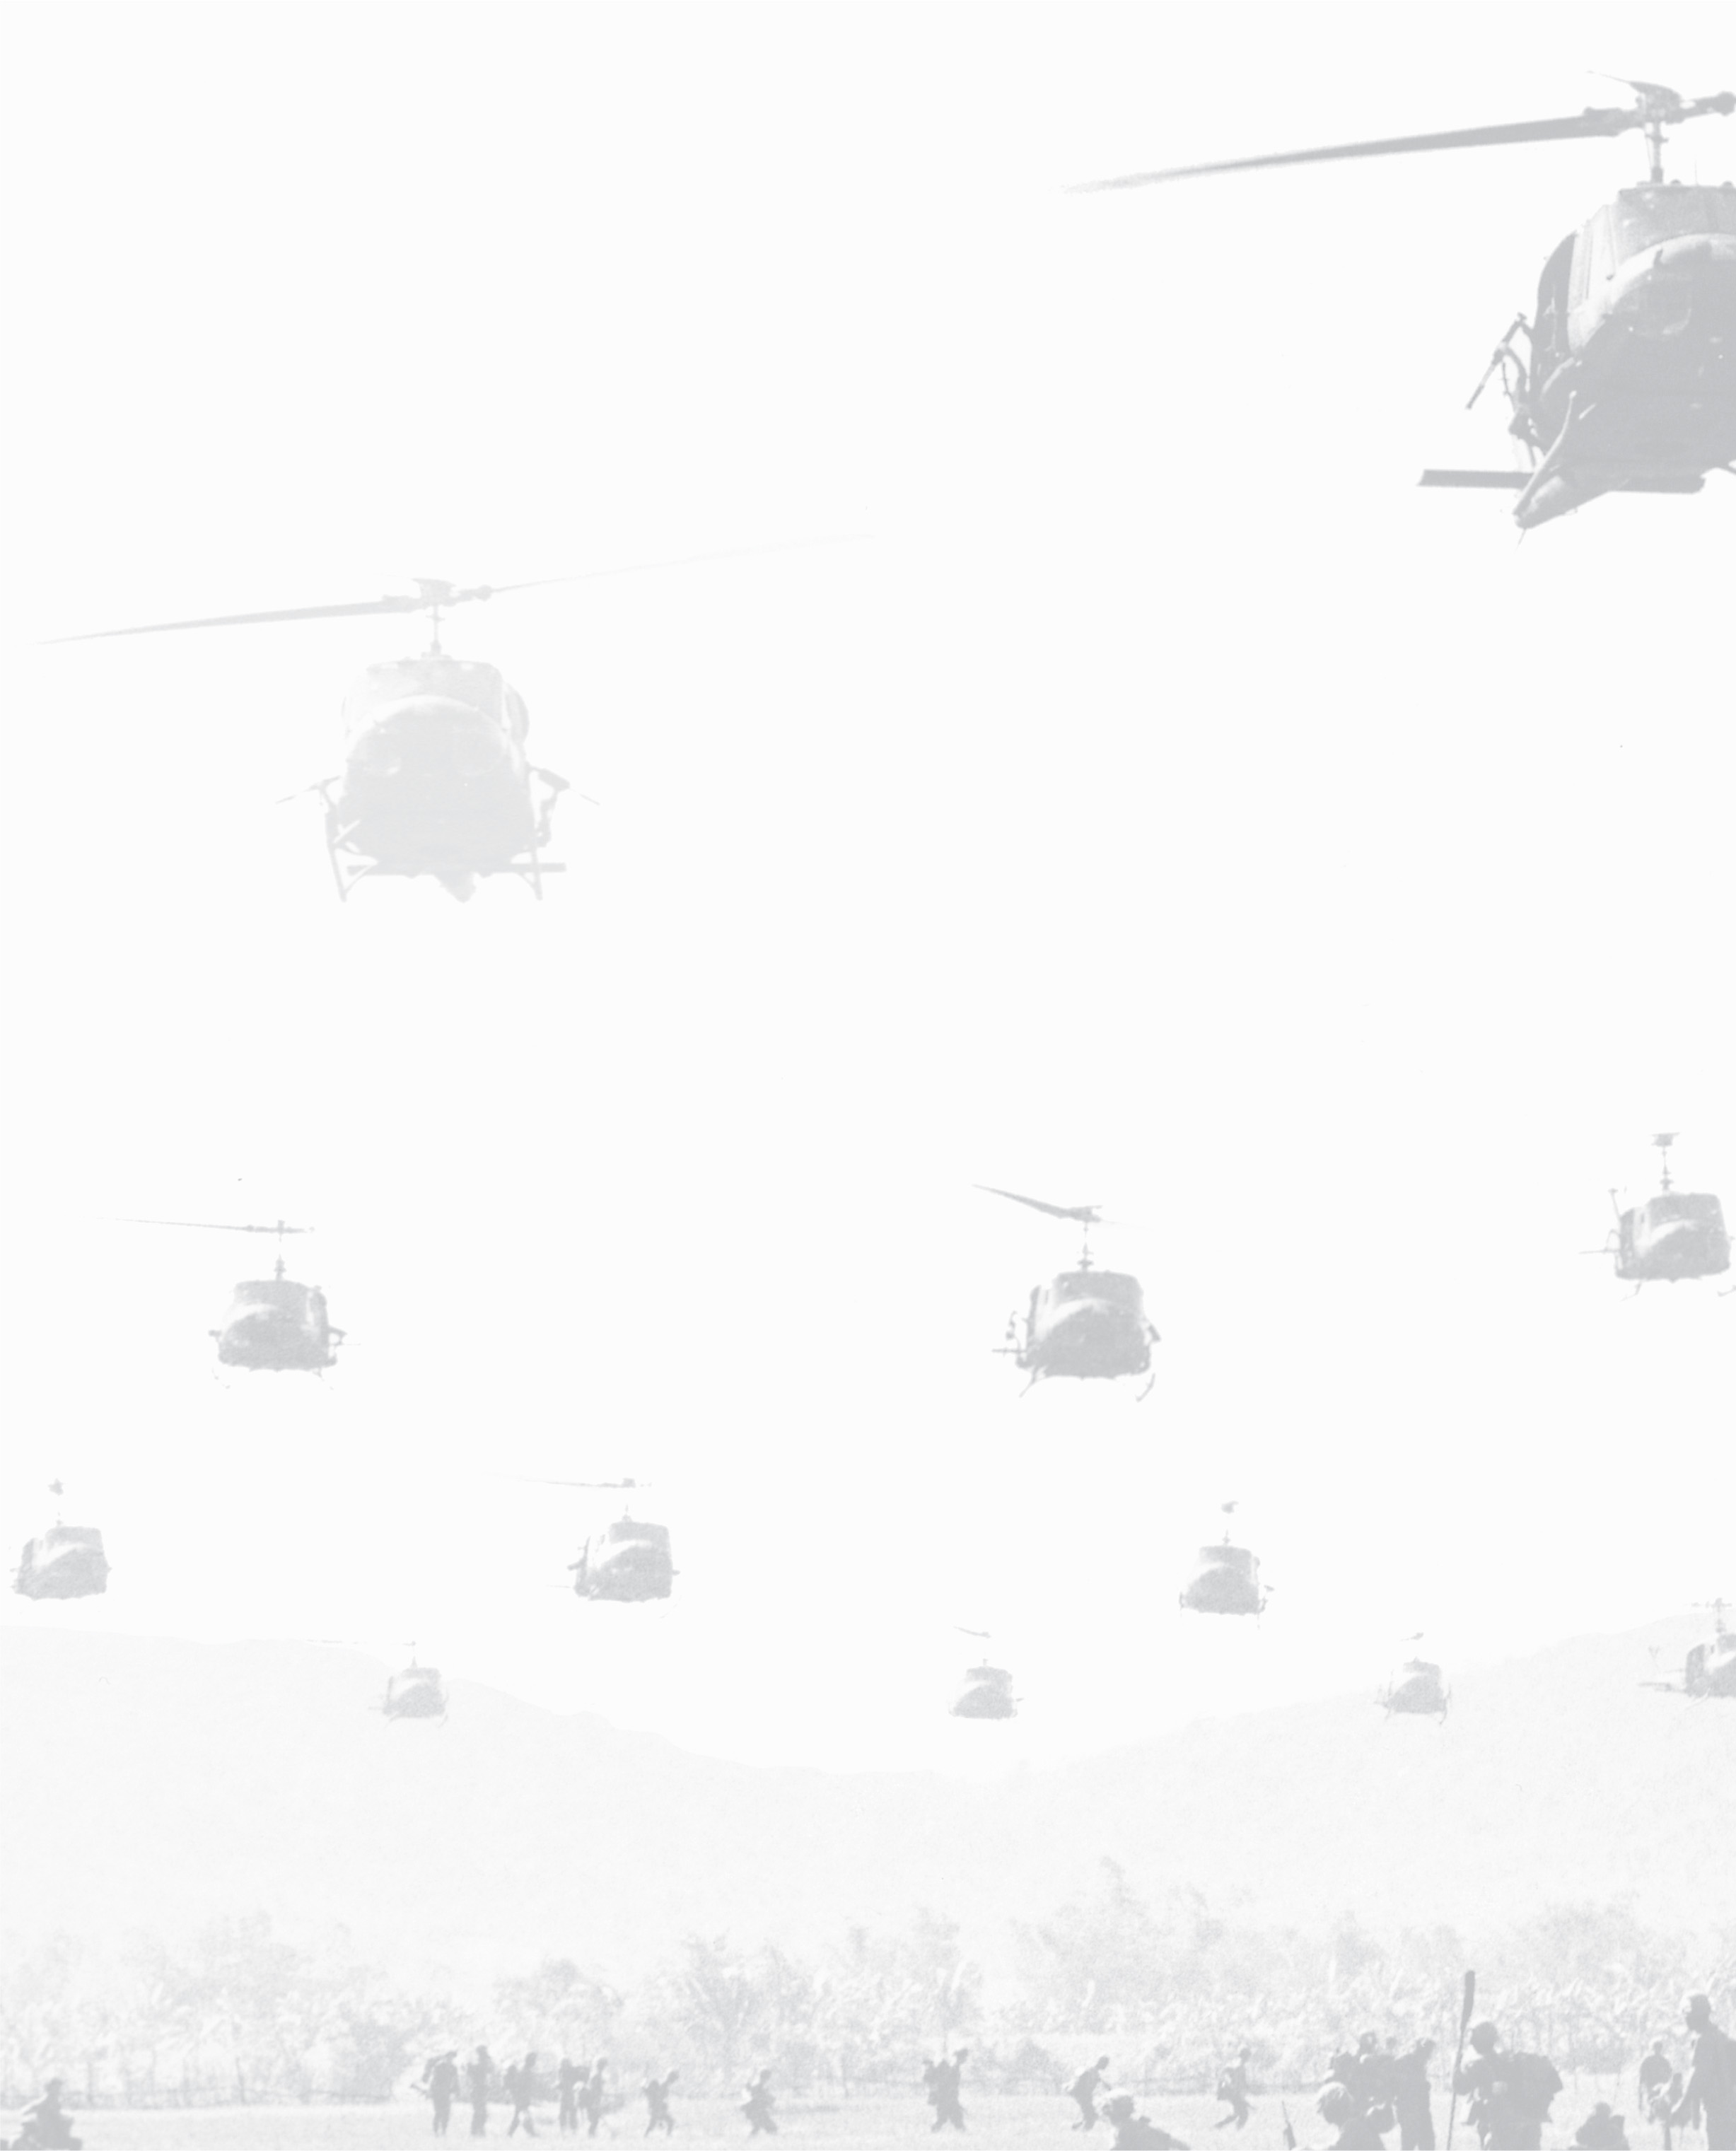 photos: dozens of helicopters fill the sky over soldiers walking across a field.